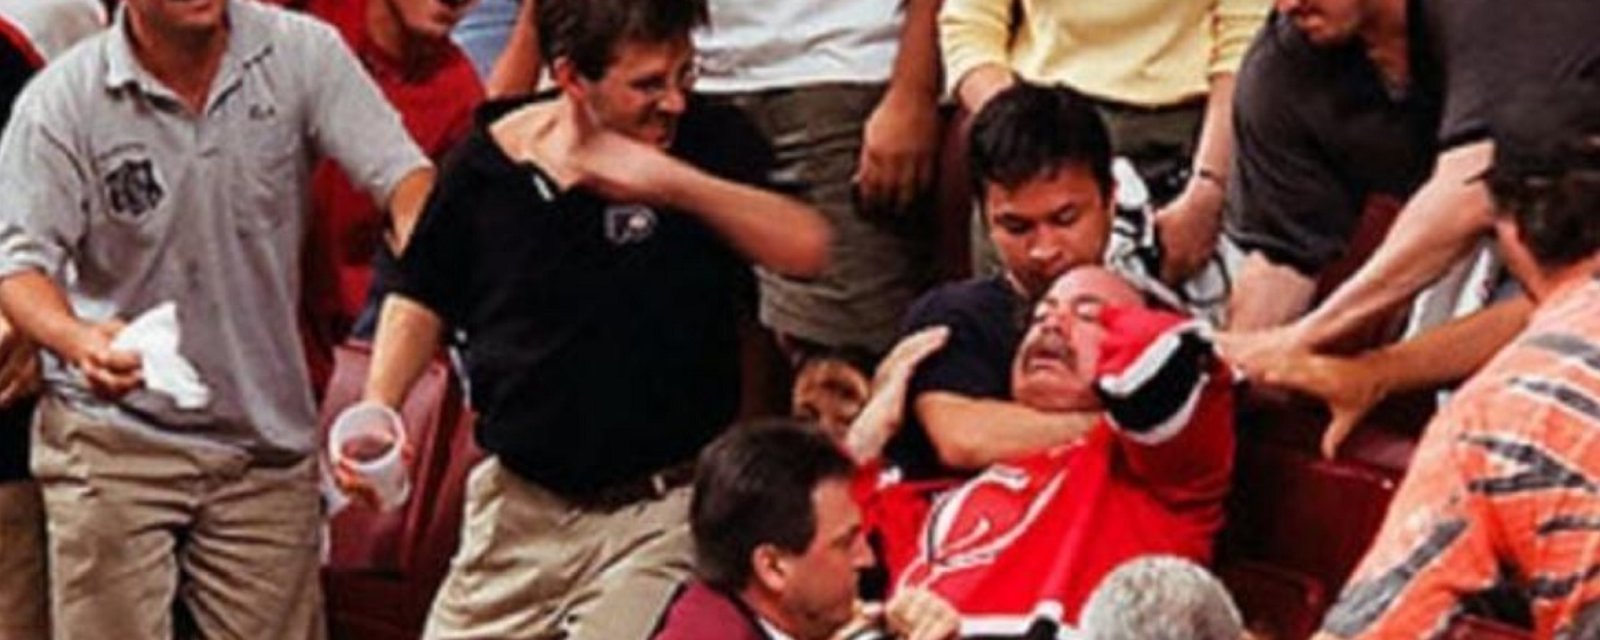 Hockey 'fan' convicted of stabbing rival supporter over team loyalty. 